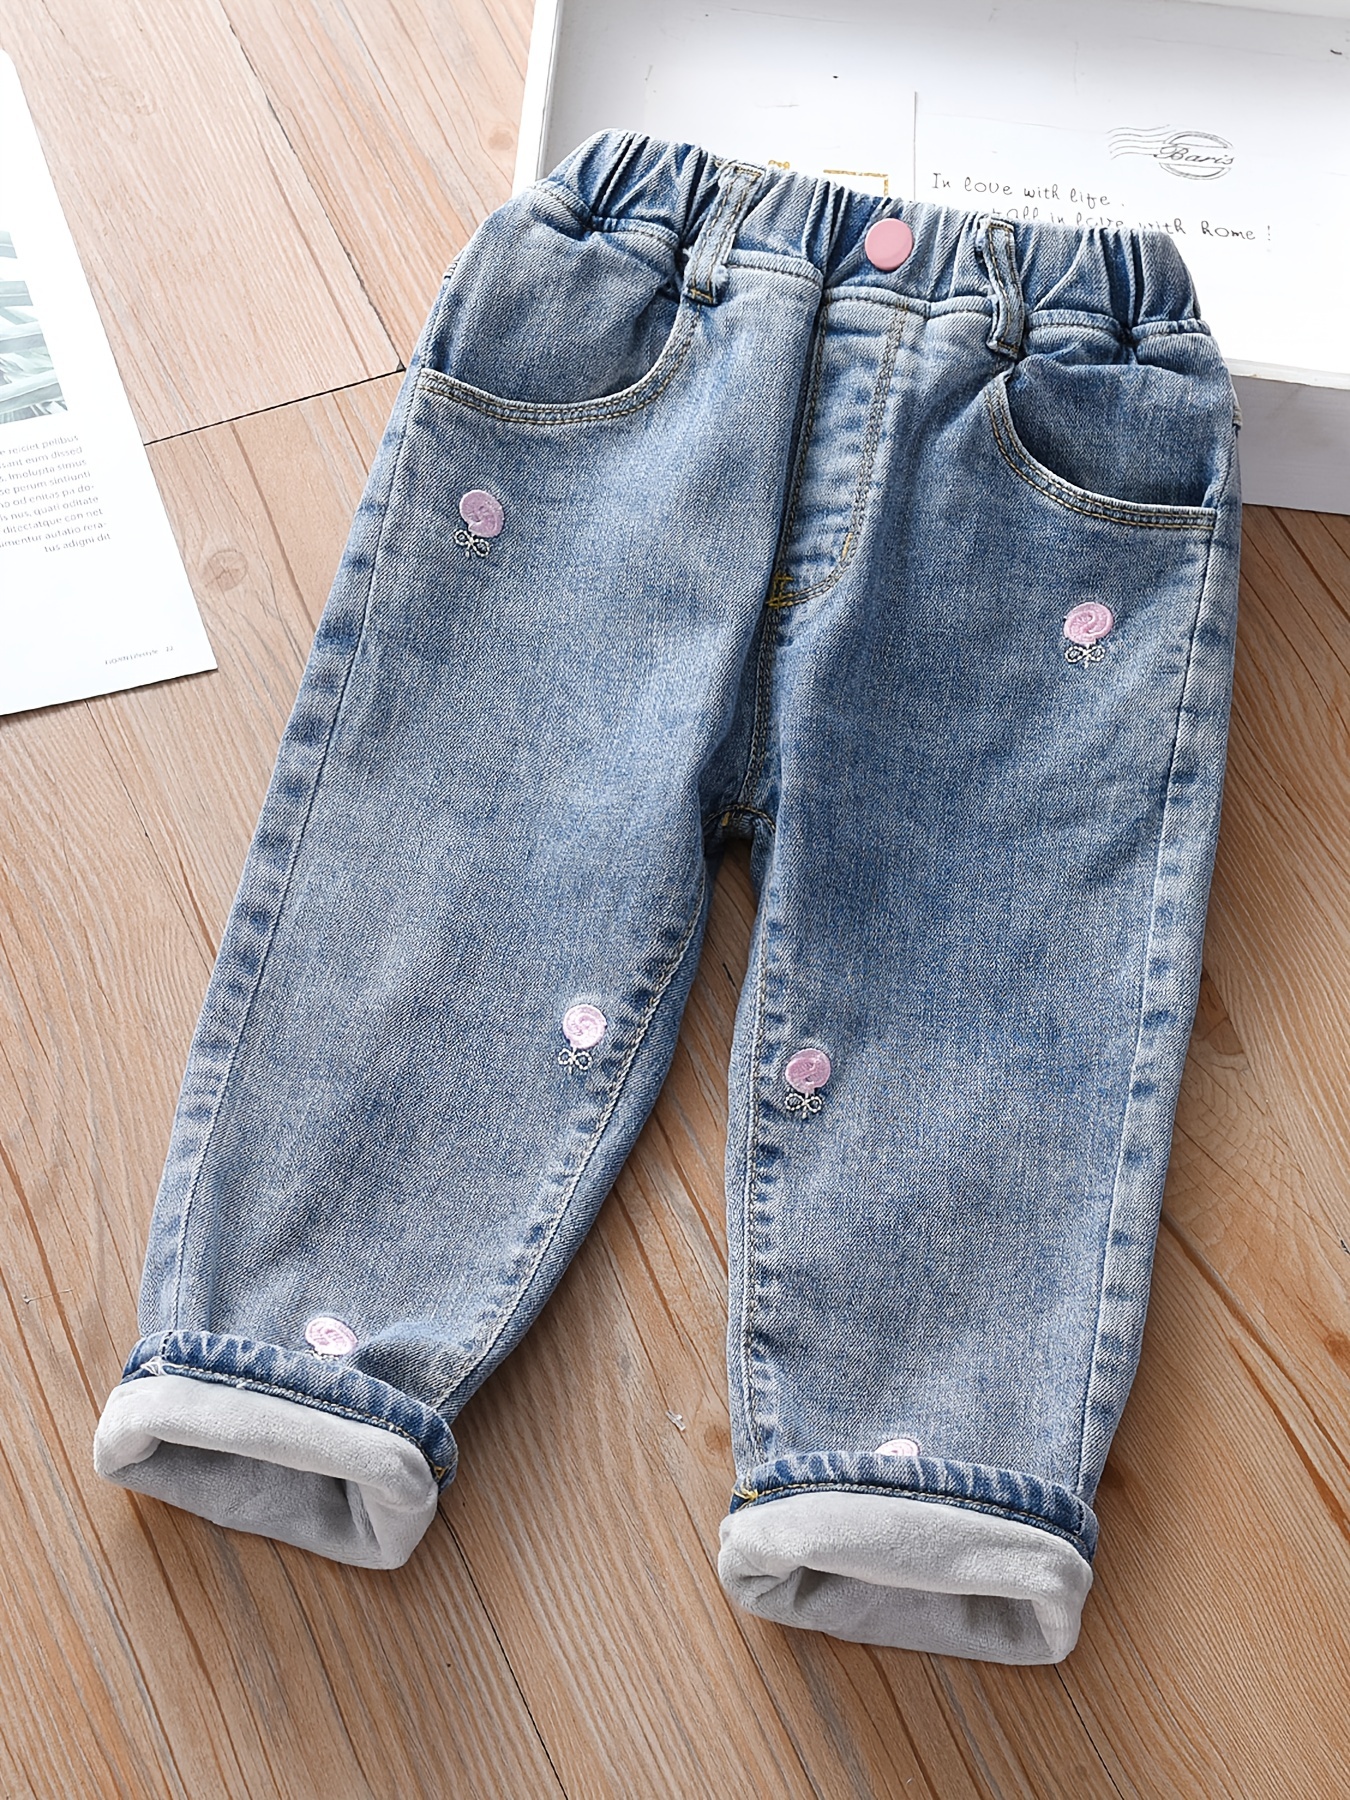 Cute Hearts Graphic Jeans For Young Girls, Pull-on Casual Straight Denim  Pants For All Seasons